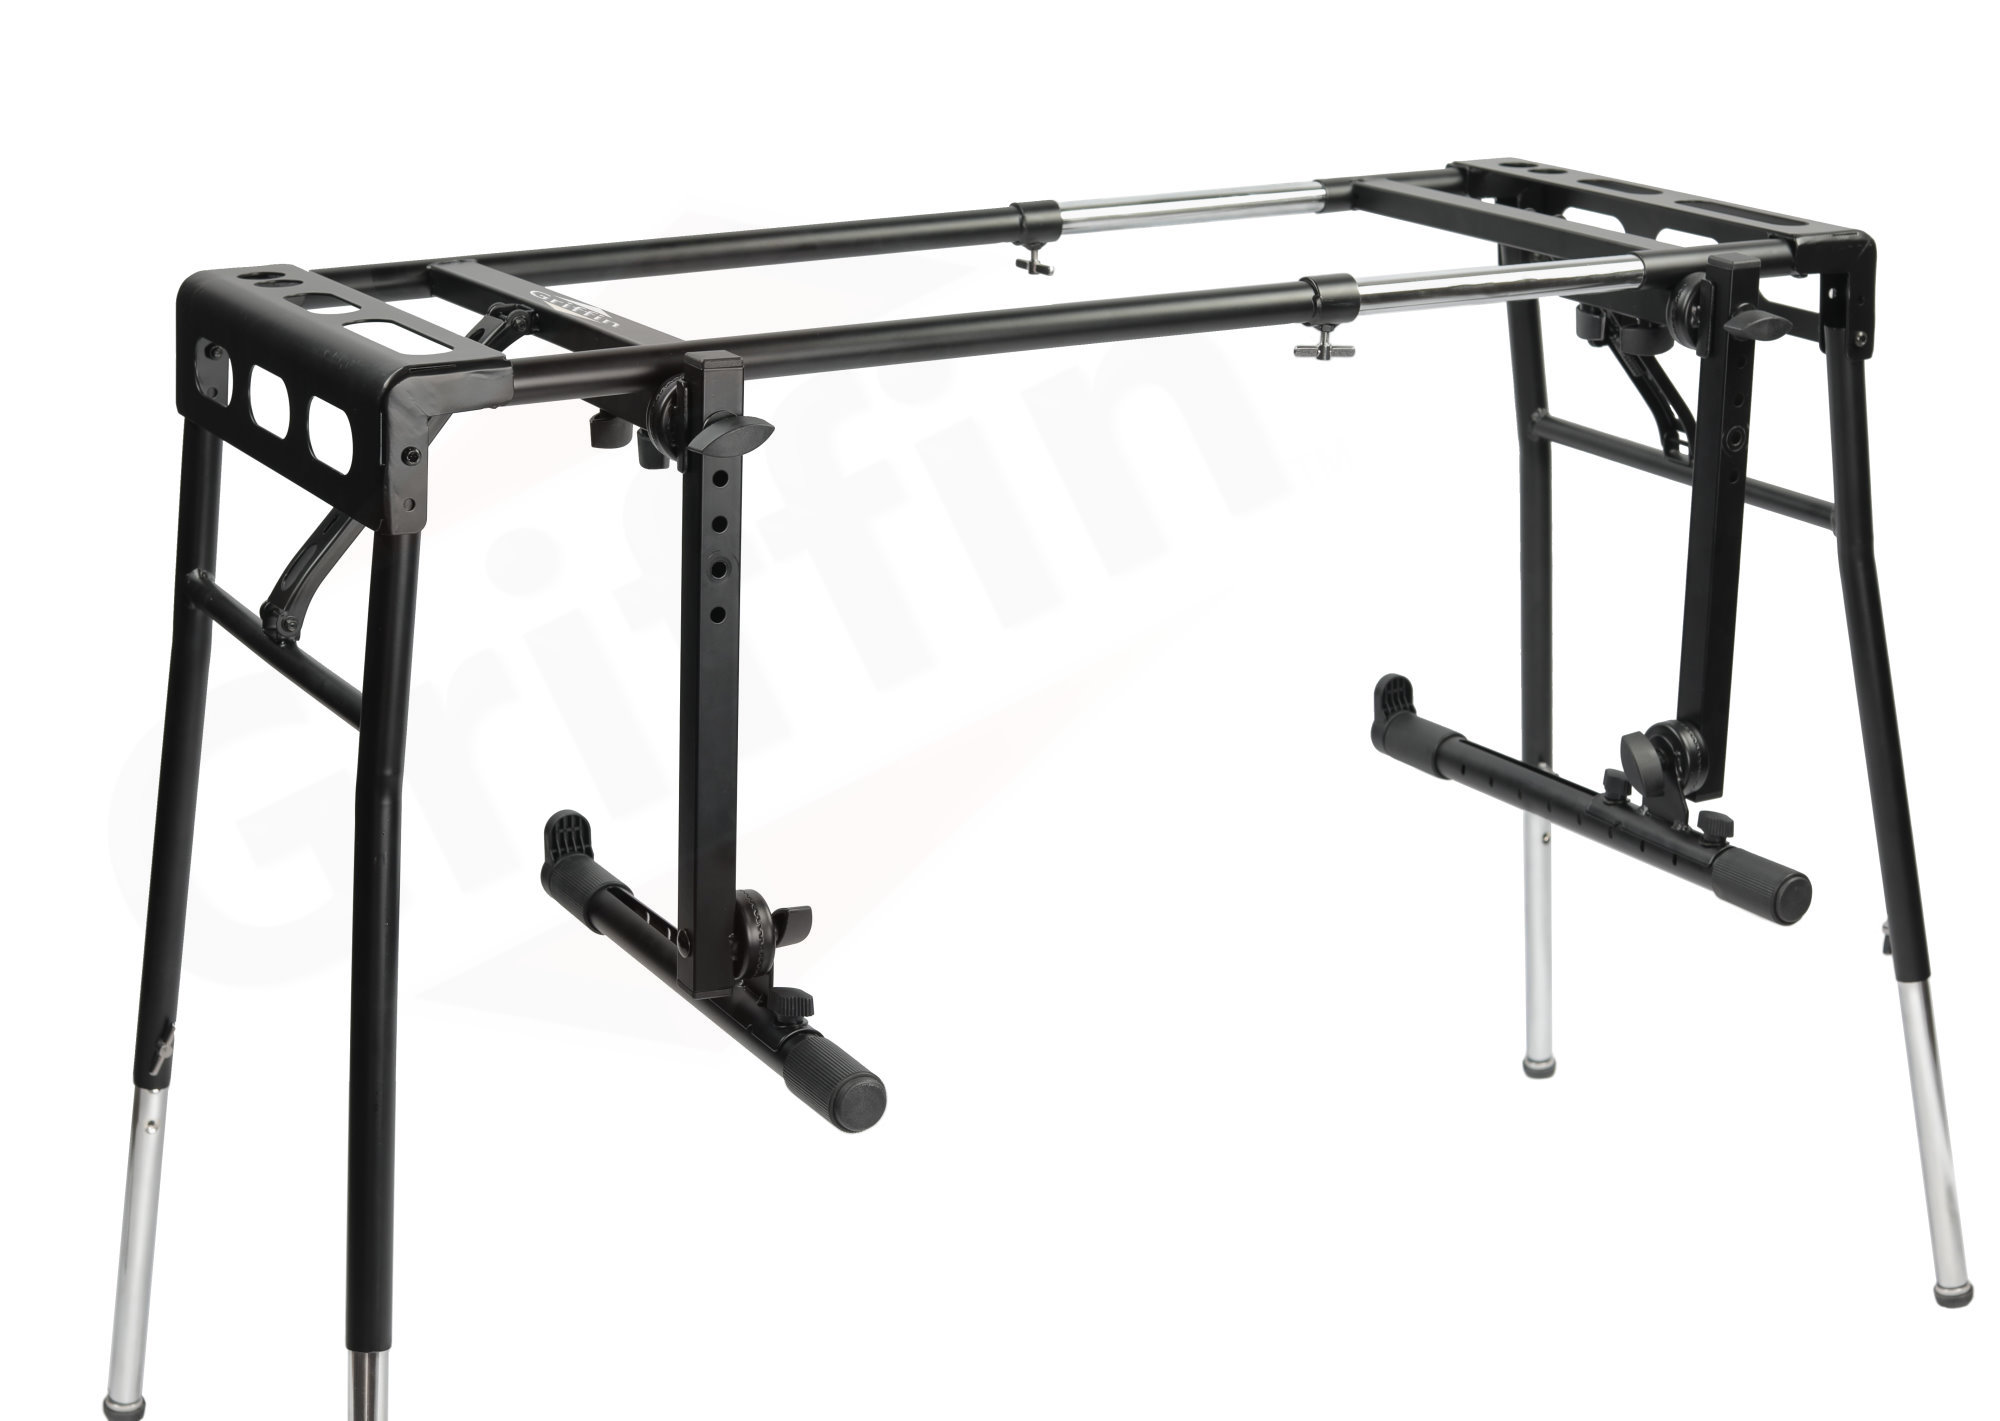 2 Tier DJ Coffin Workstation Stand by Griffin – Double Table Top